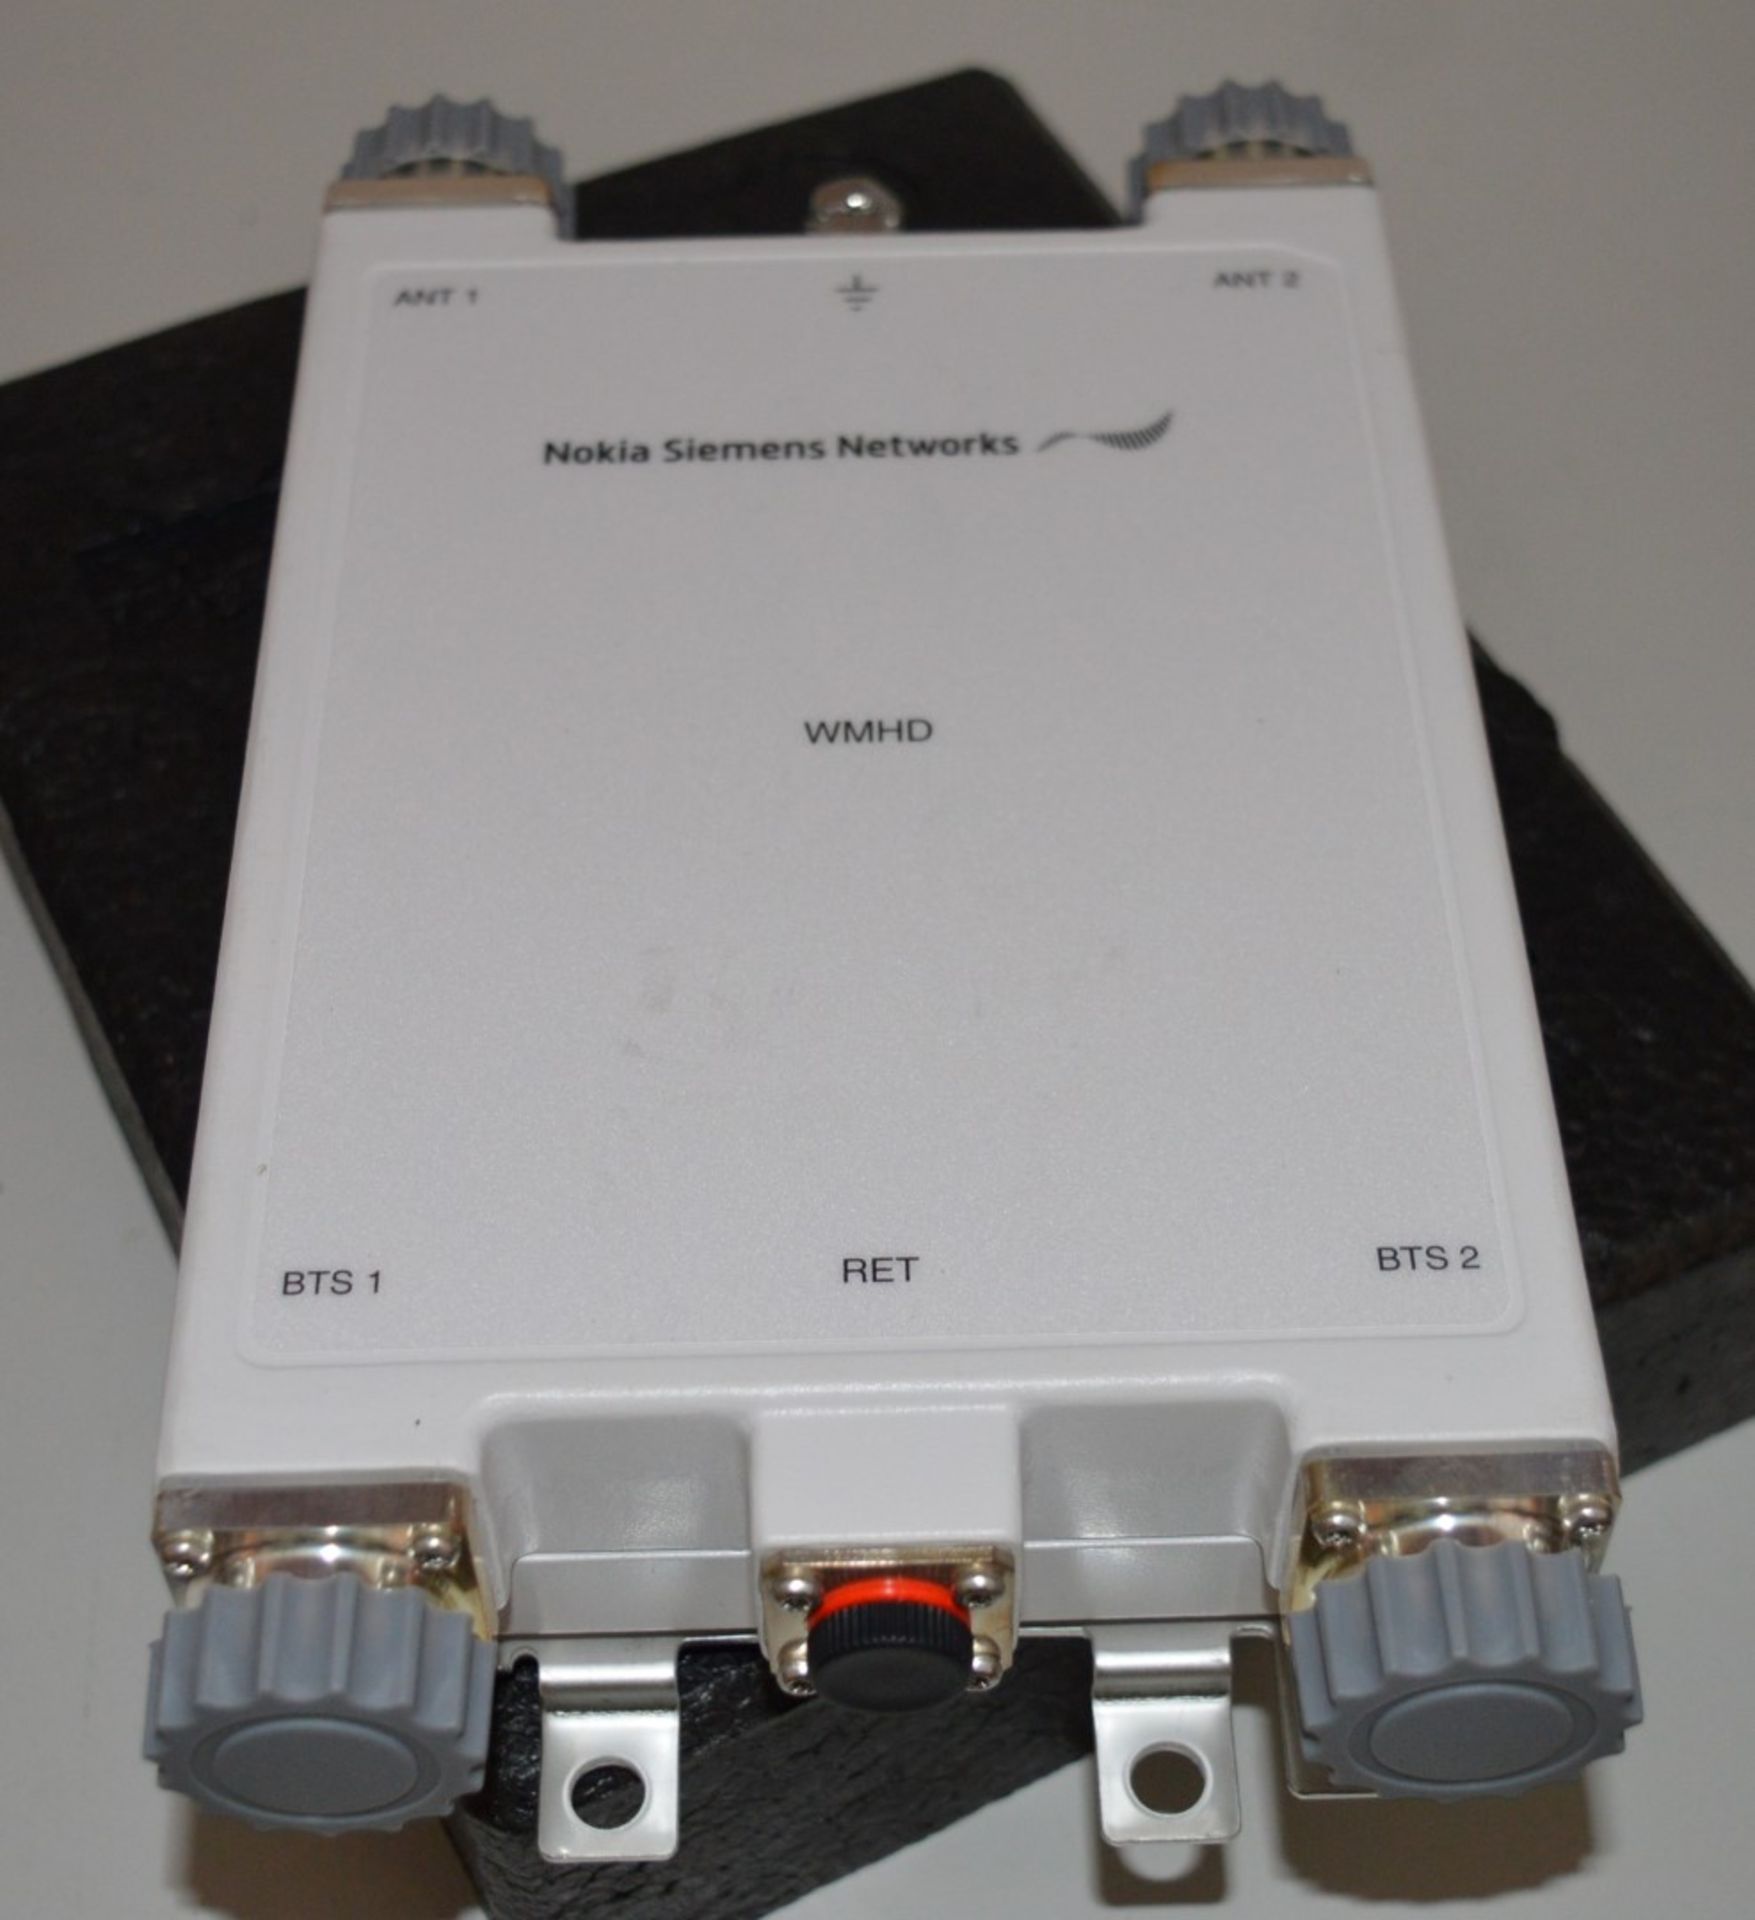 1 x Nokia Siemens Networks WMHD 471443A.103 Transcoder - Unused Boxed Stock - CL300 - Ref PC263 - - Image 6 of 6